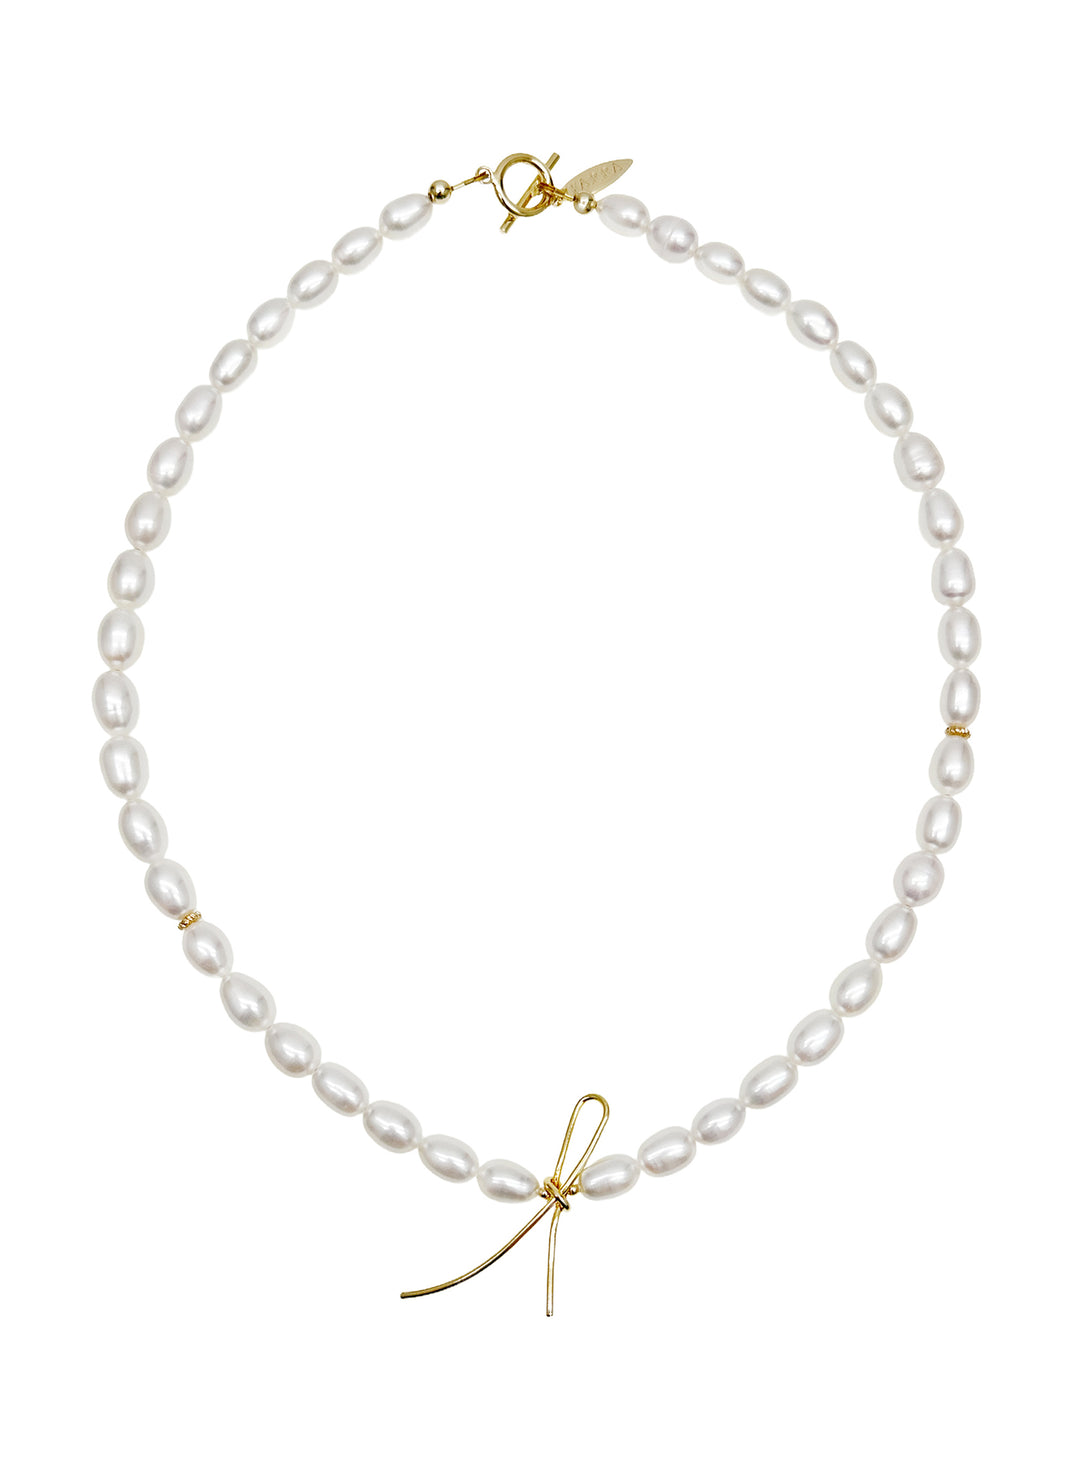 Contemporary Freshwater Pearls with Butterfly Knot Necklace LN066 - FARRA